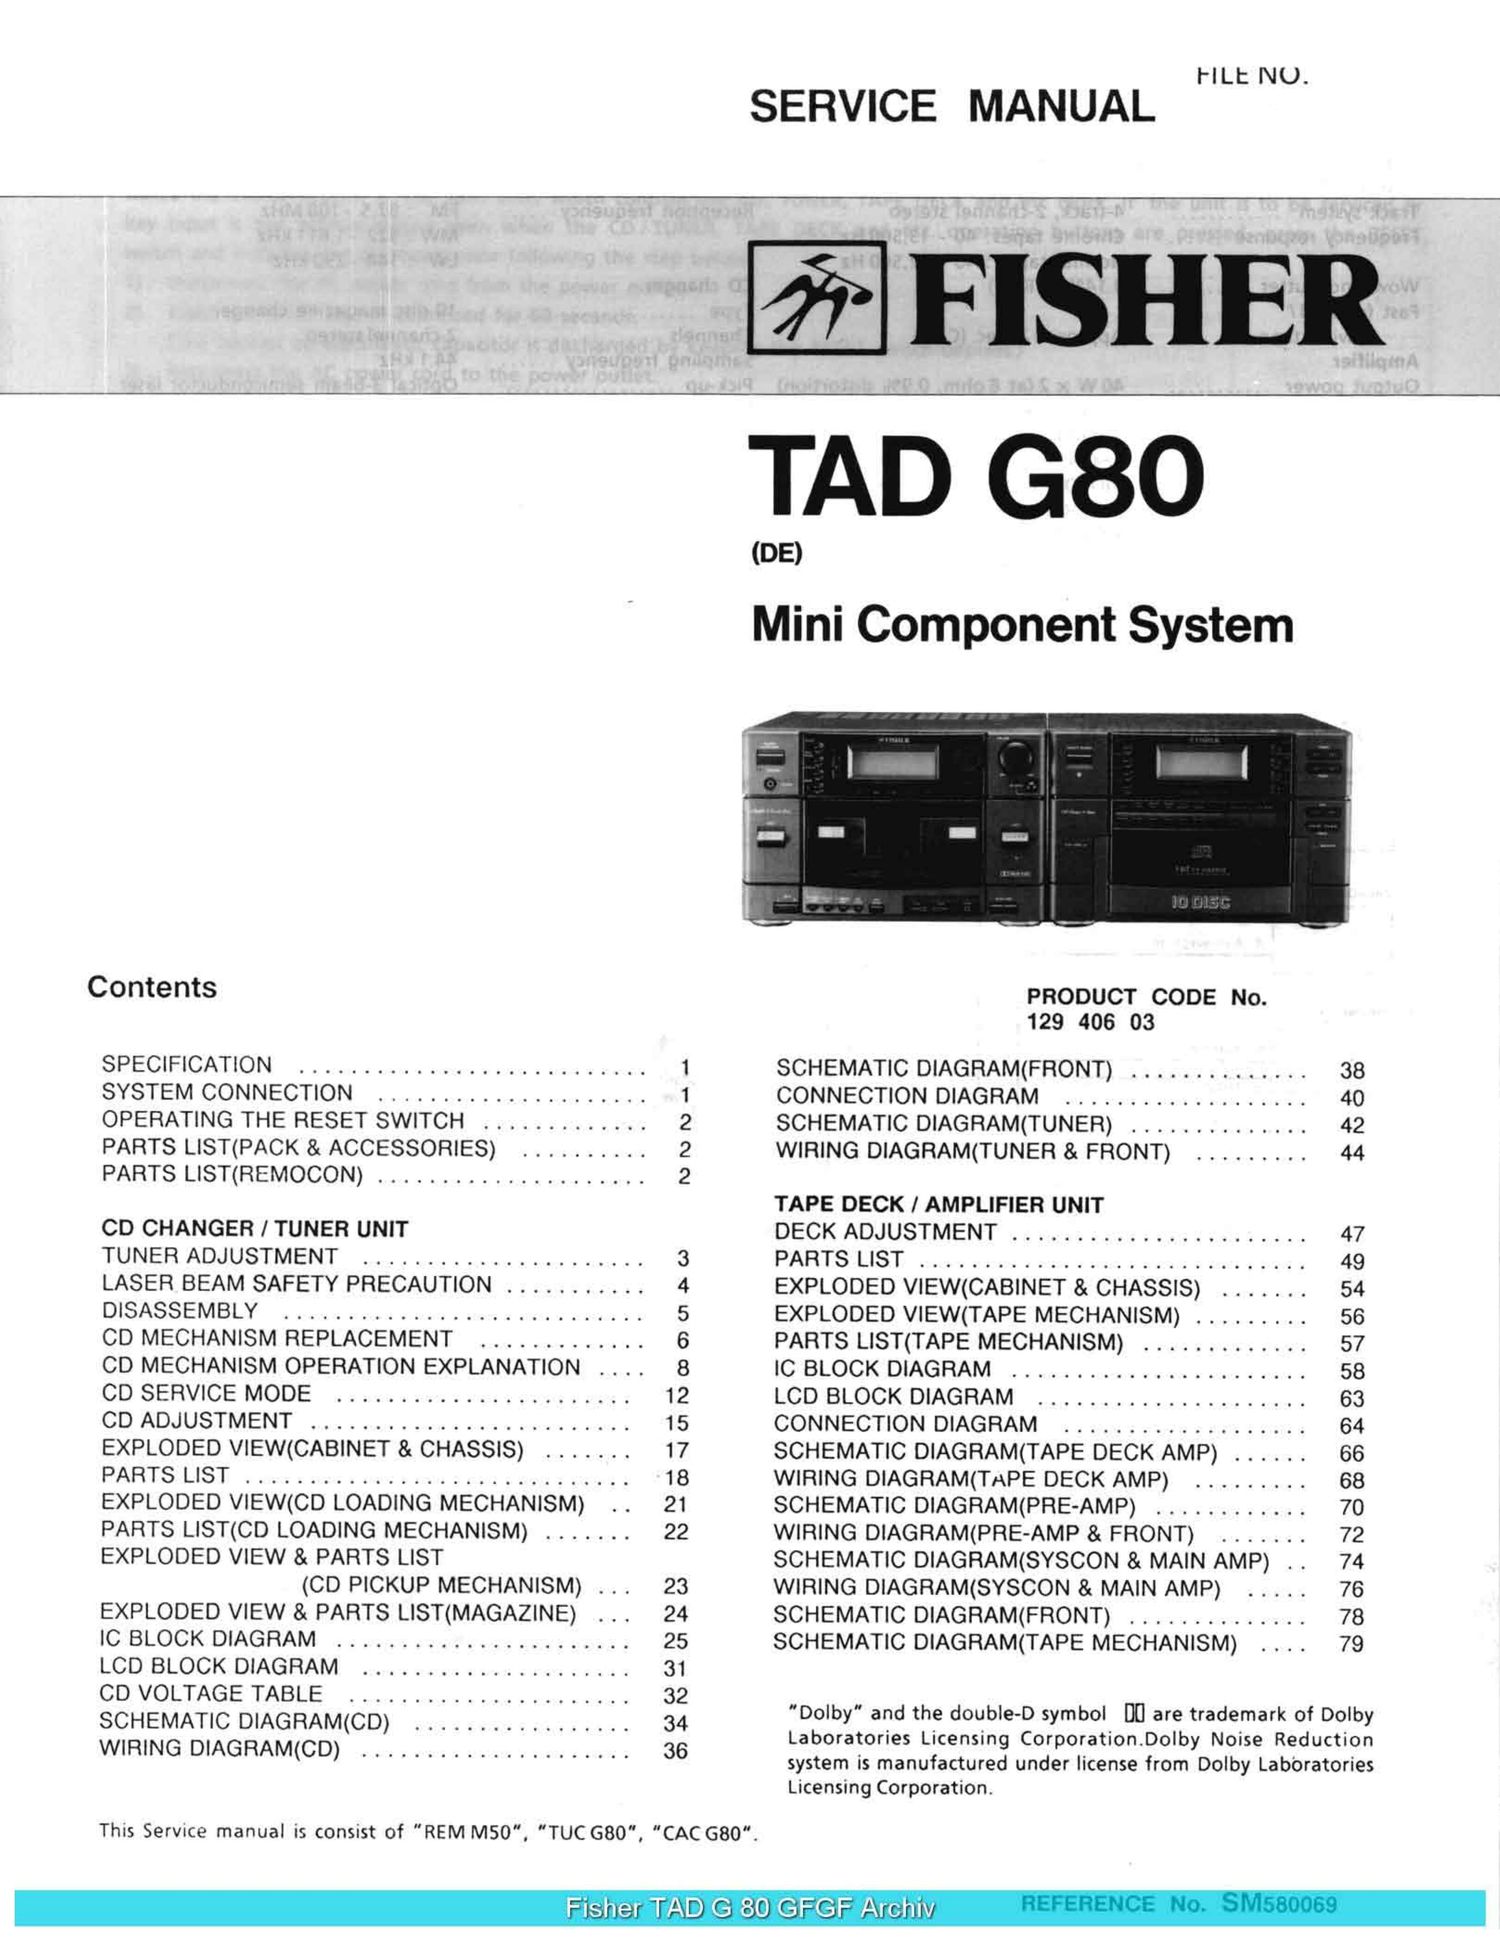 Fisher TAD G80 Service Manual